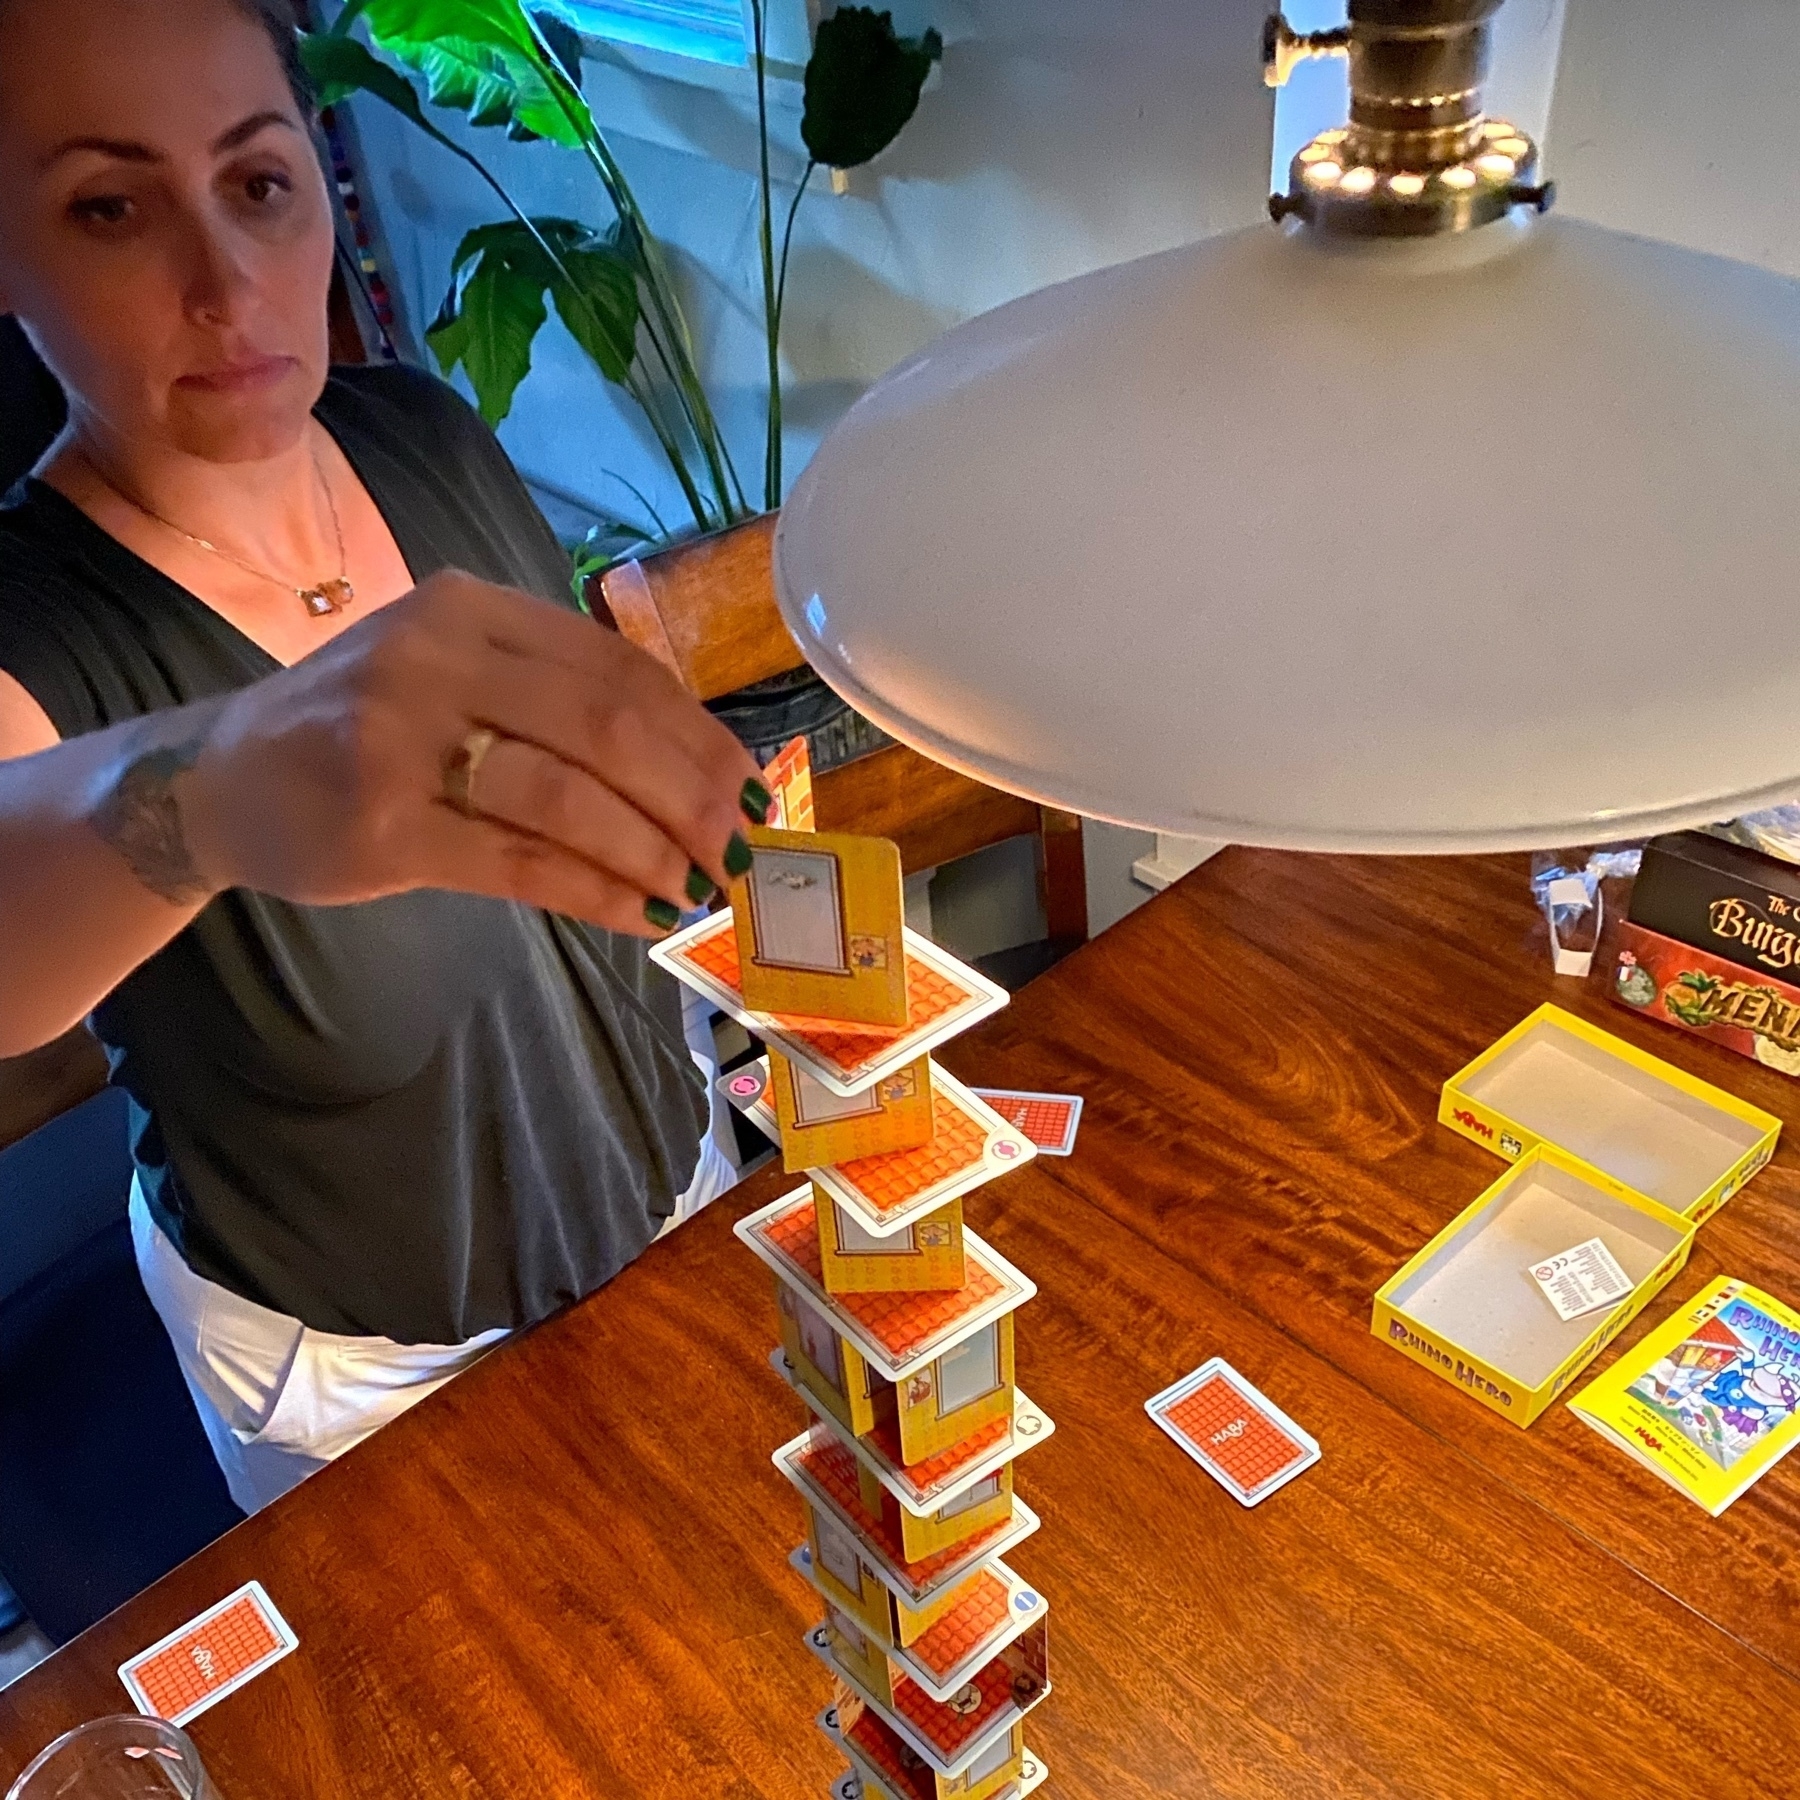 Lauren delicately places a structure card to the Rhino Hero tower. The card tower is so high it is about to hit the hanging lamp. 